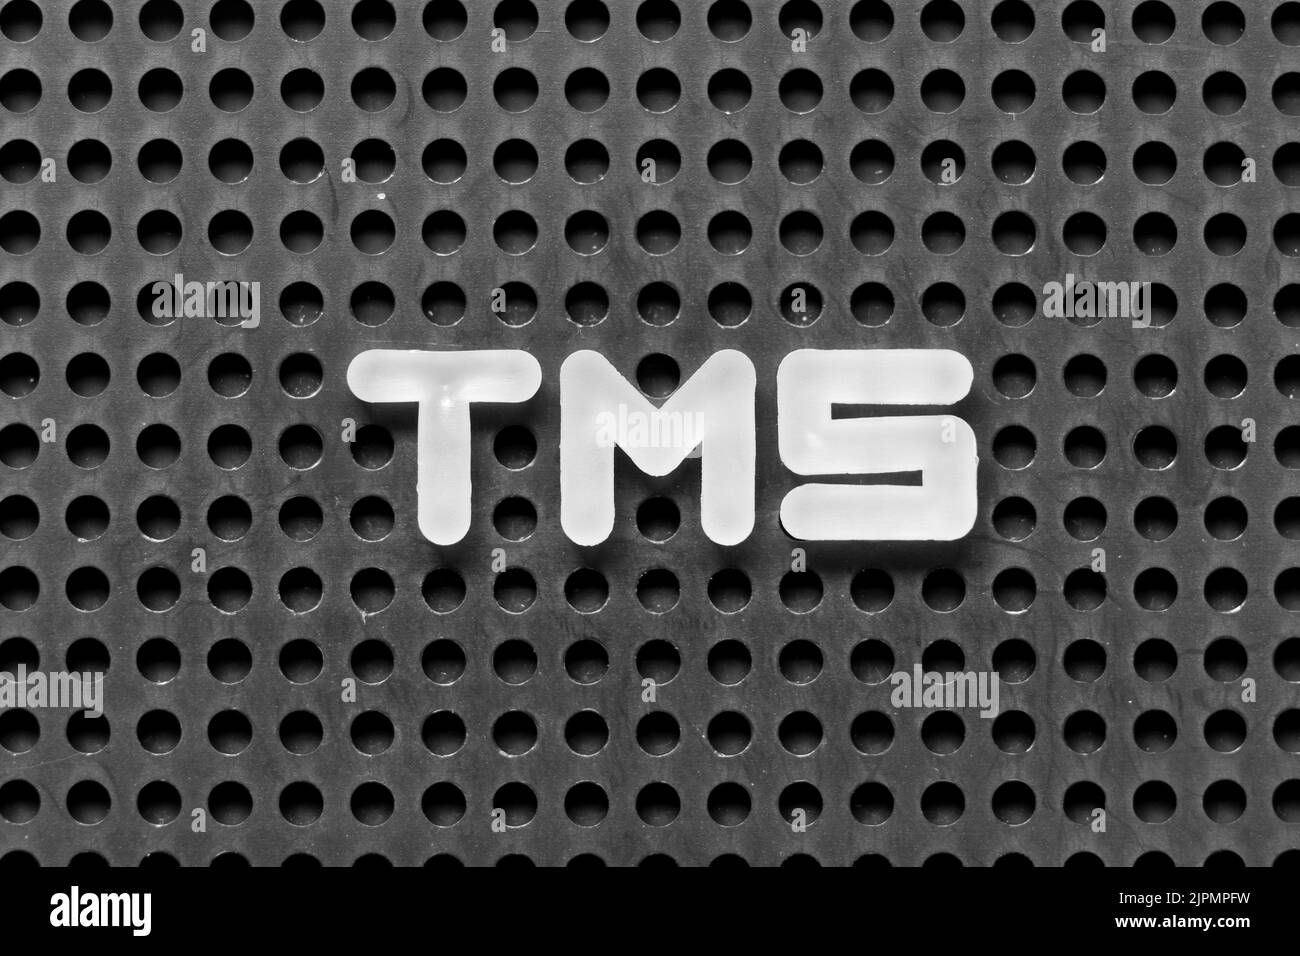 White alphabet letter in word TMS (Abbreviation of Transportation management system or Transcranial magnetic stimulation) on black pegboard background Stock Photo